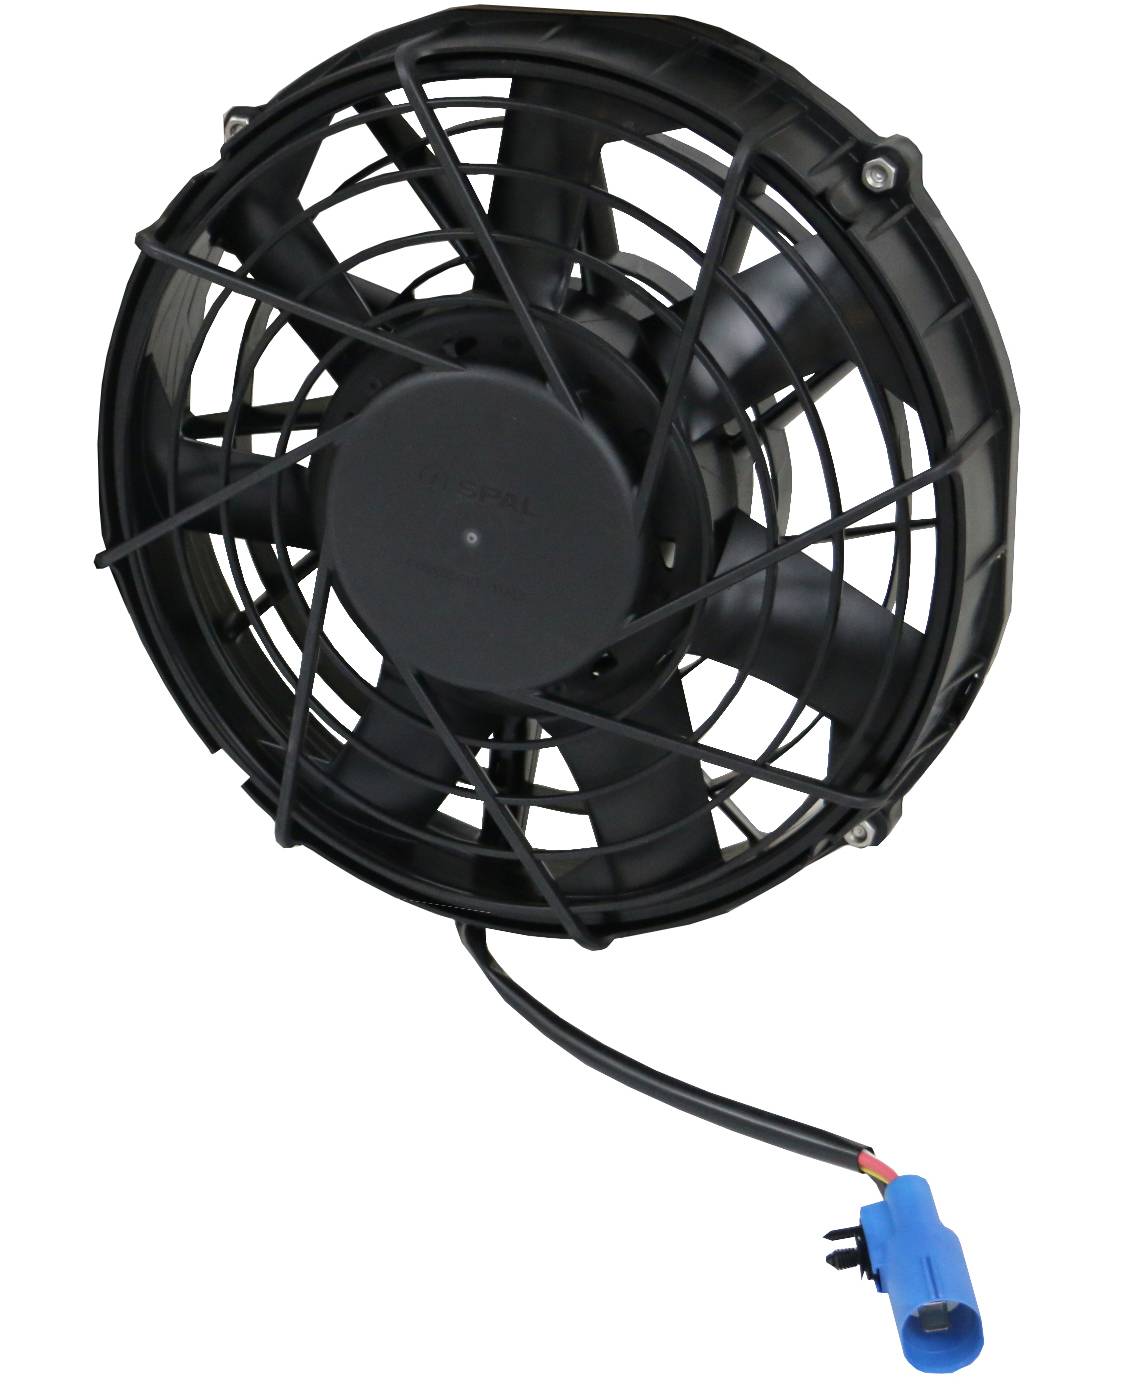 Universal electric fan SPAL 96mm - suction, 12V, 50,50 €